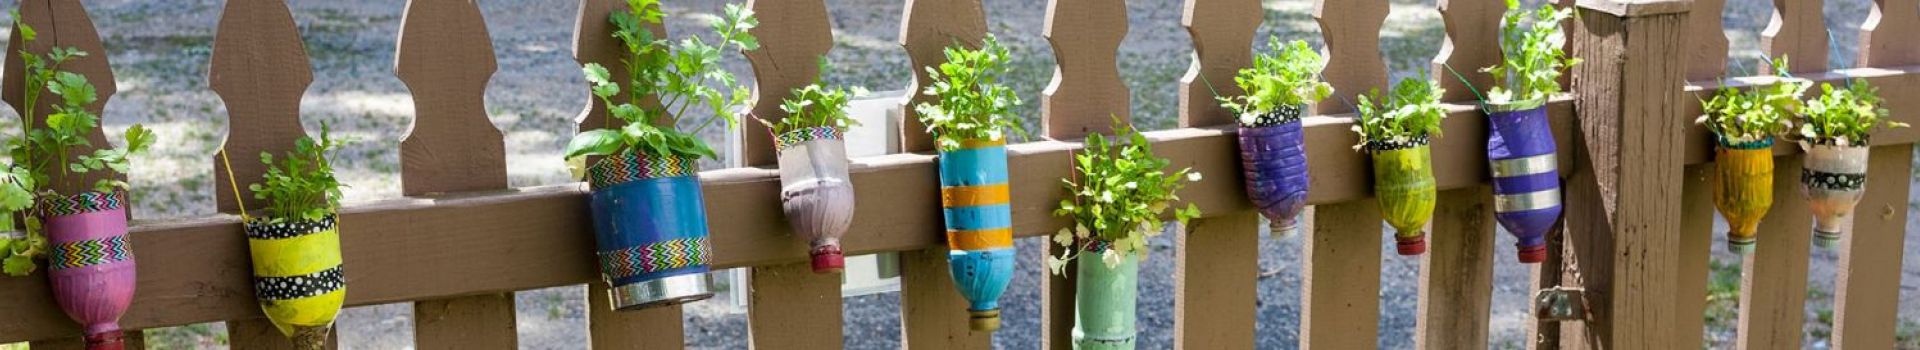 Decorated plastic bottles containing plants hang on a wooden fence.